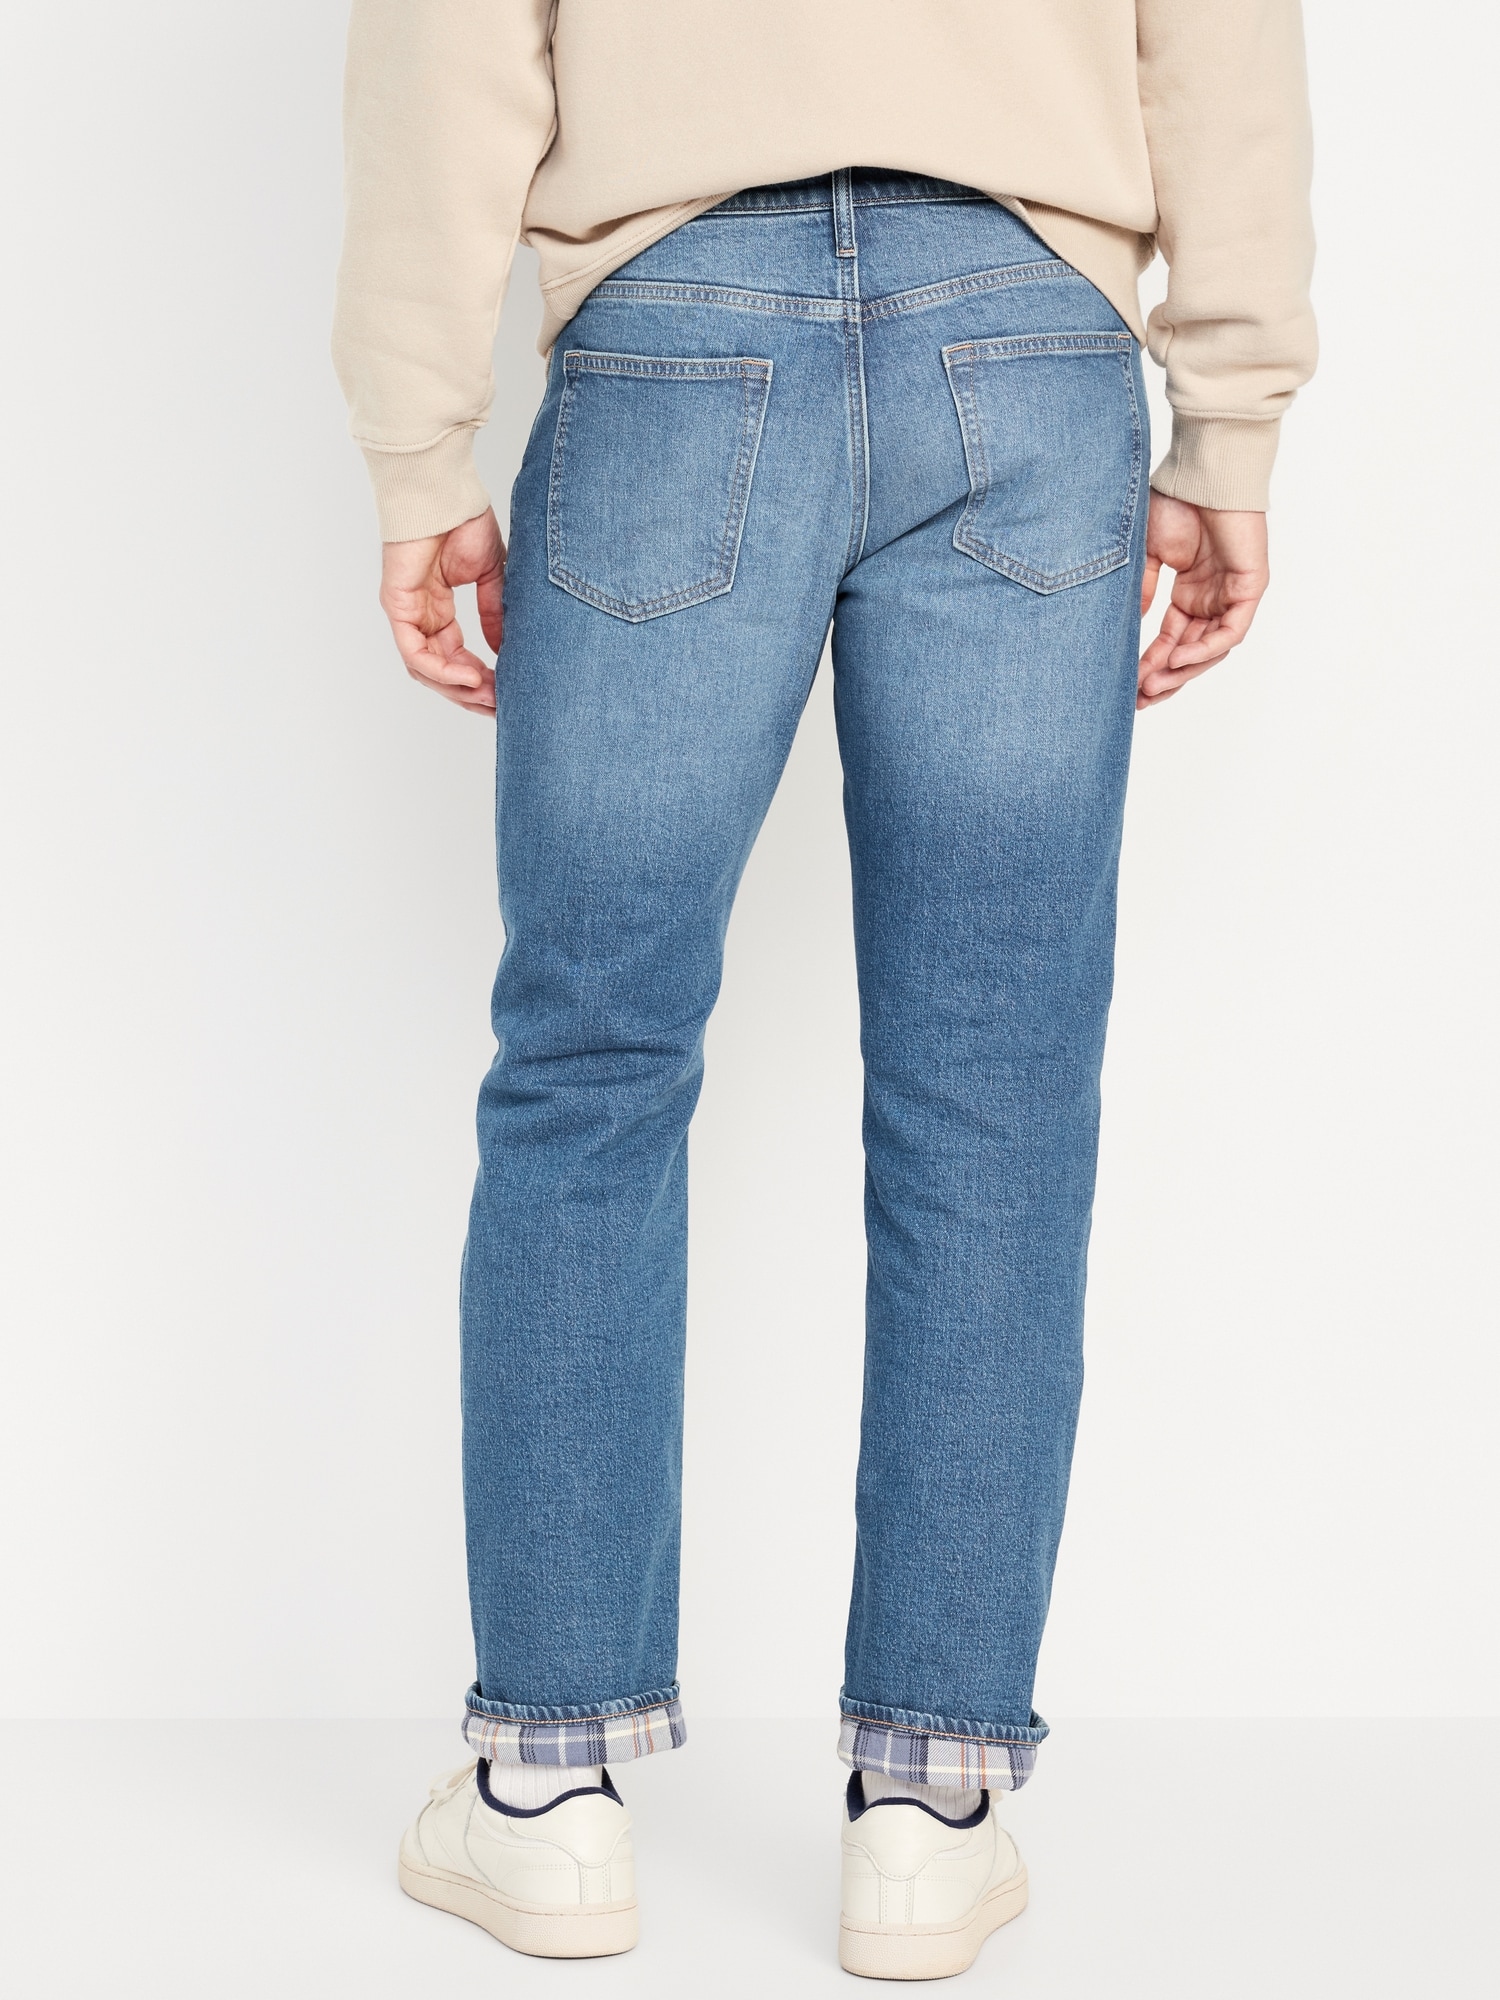 Straight Flannel-Lined Built-In Flex Jeans for Men | Old Navy